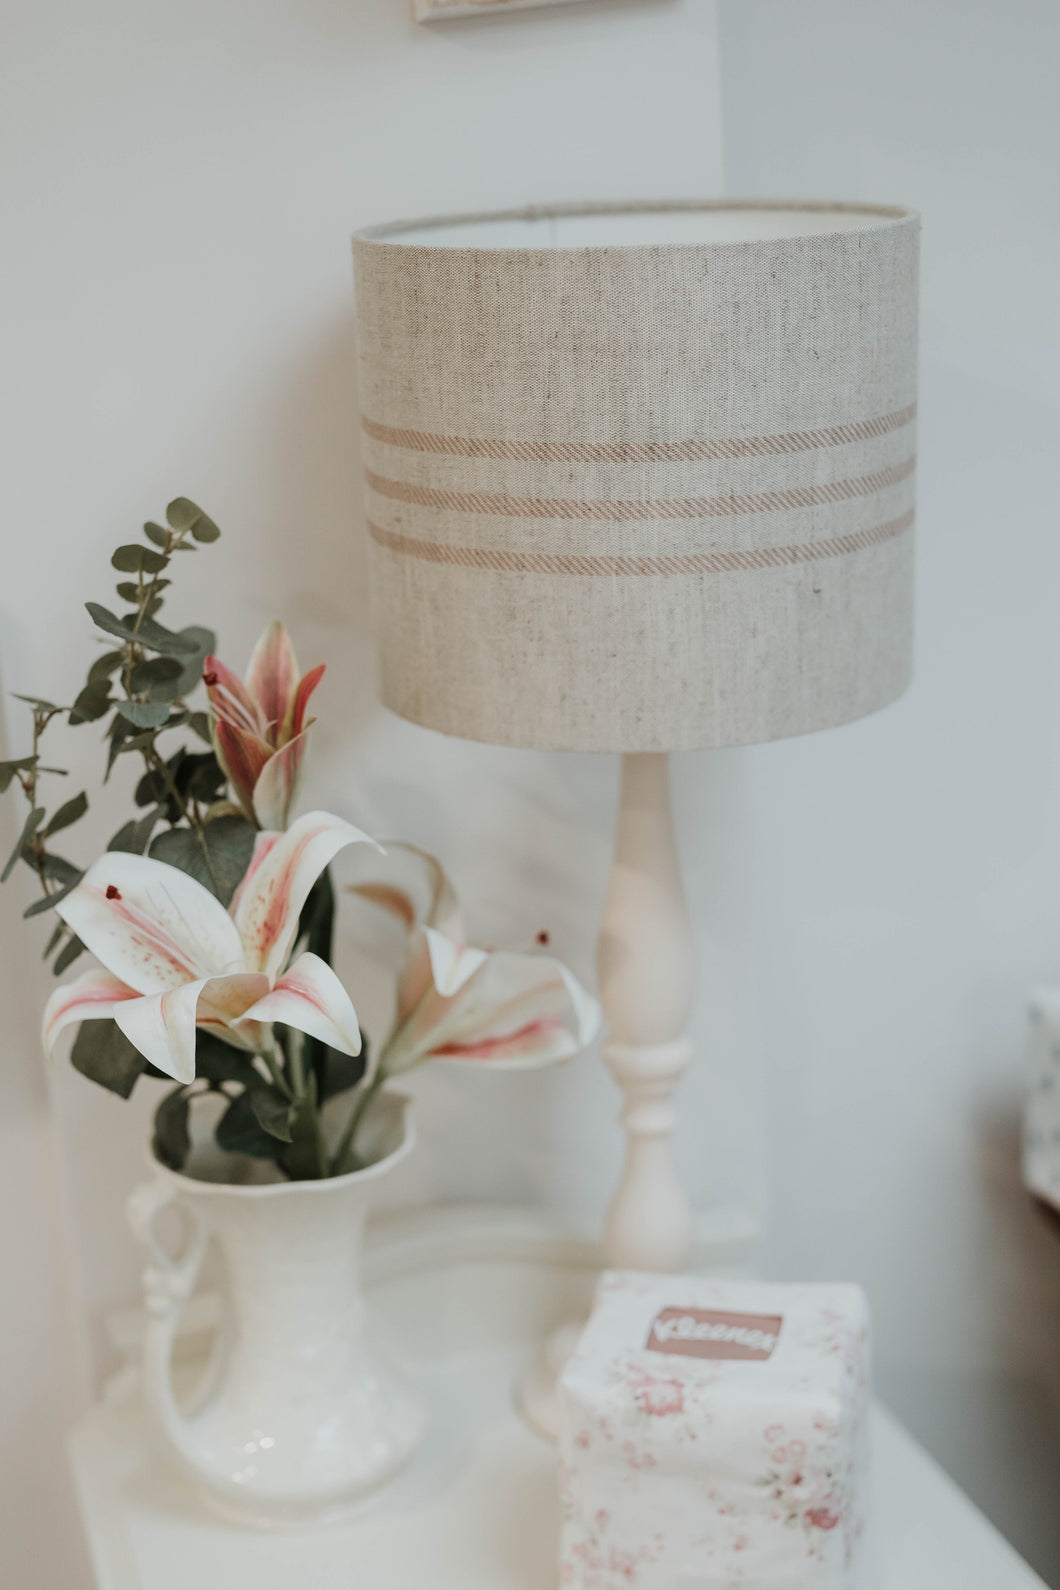 Lampshade - 25cm drum - STOCK CLEAR DOWN 3 beige/ pink stripe